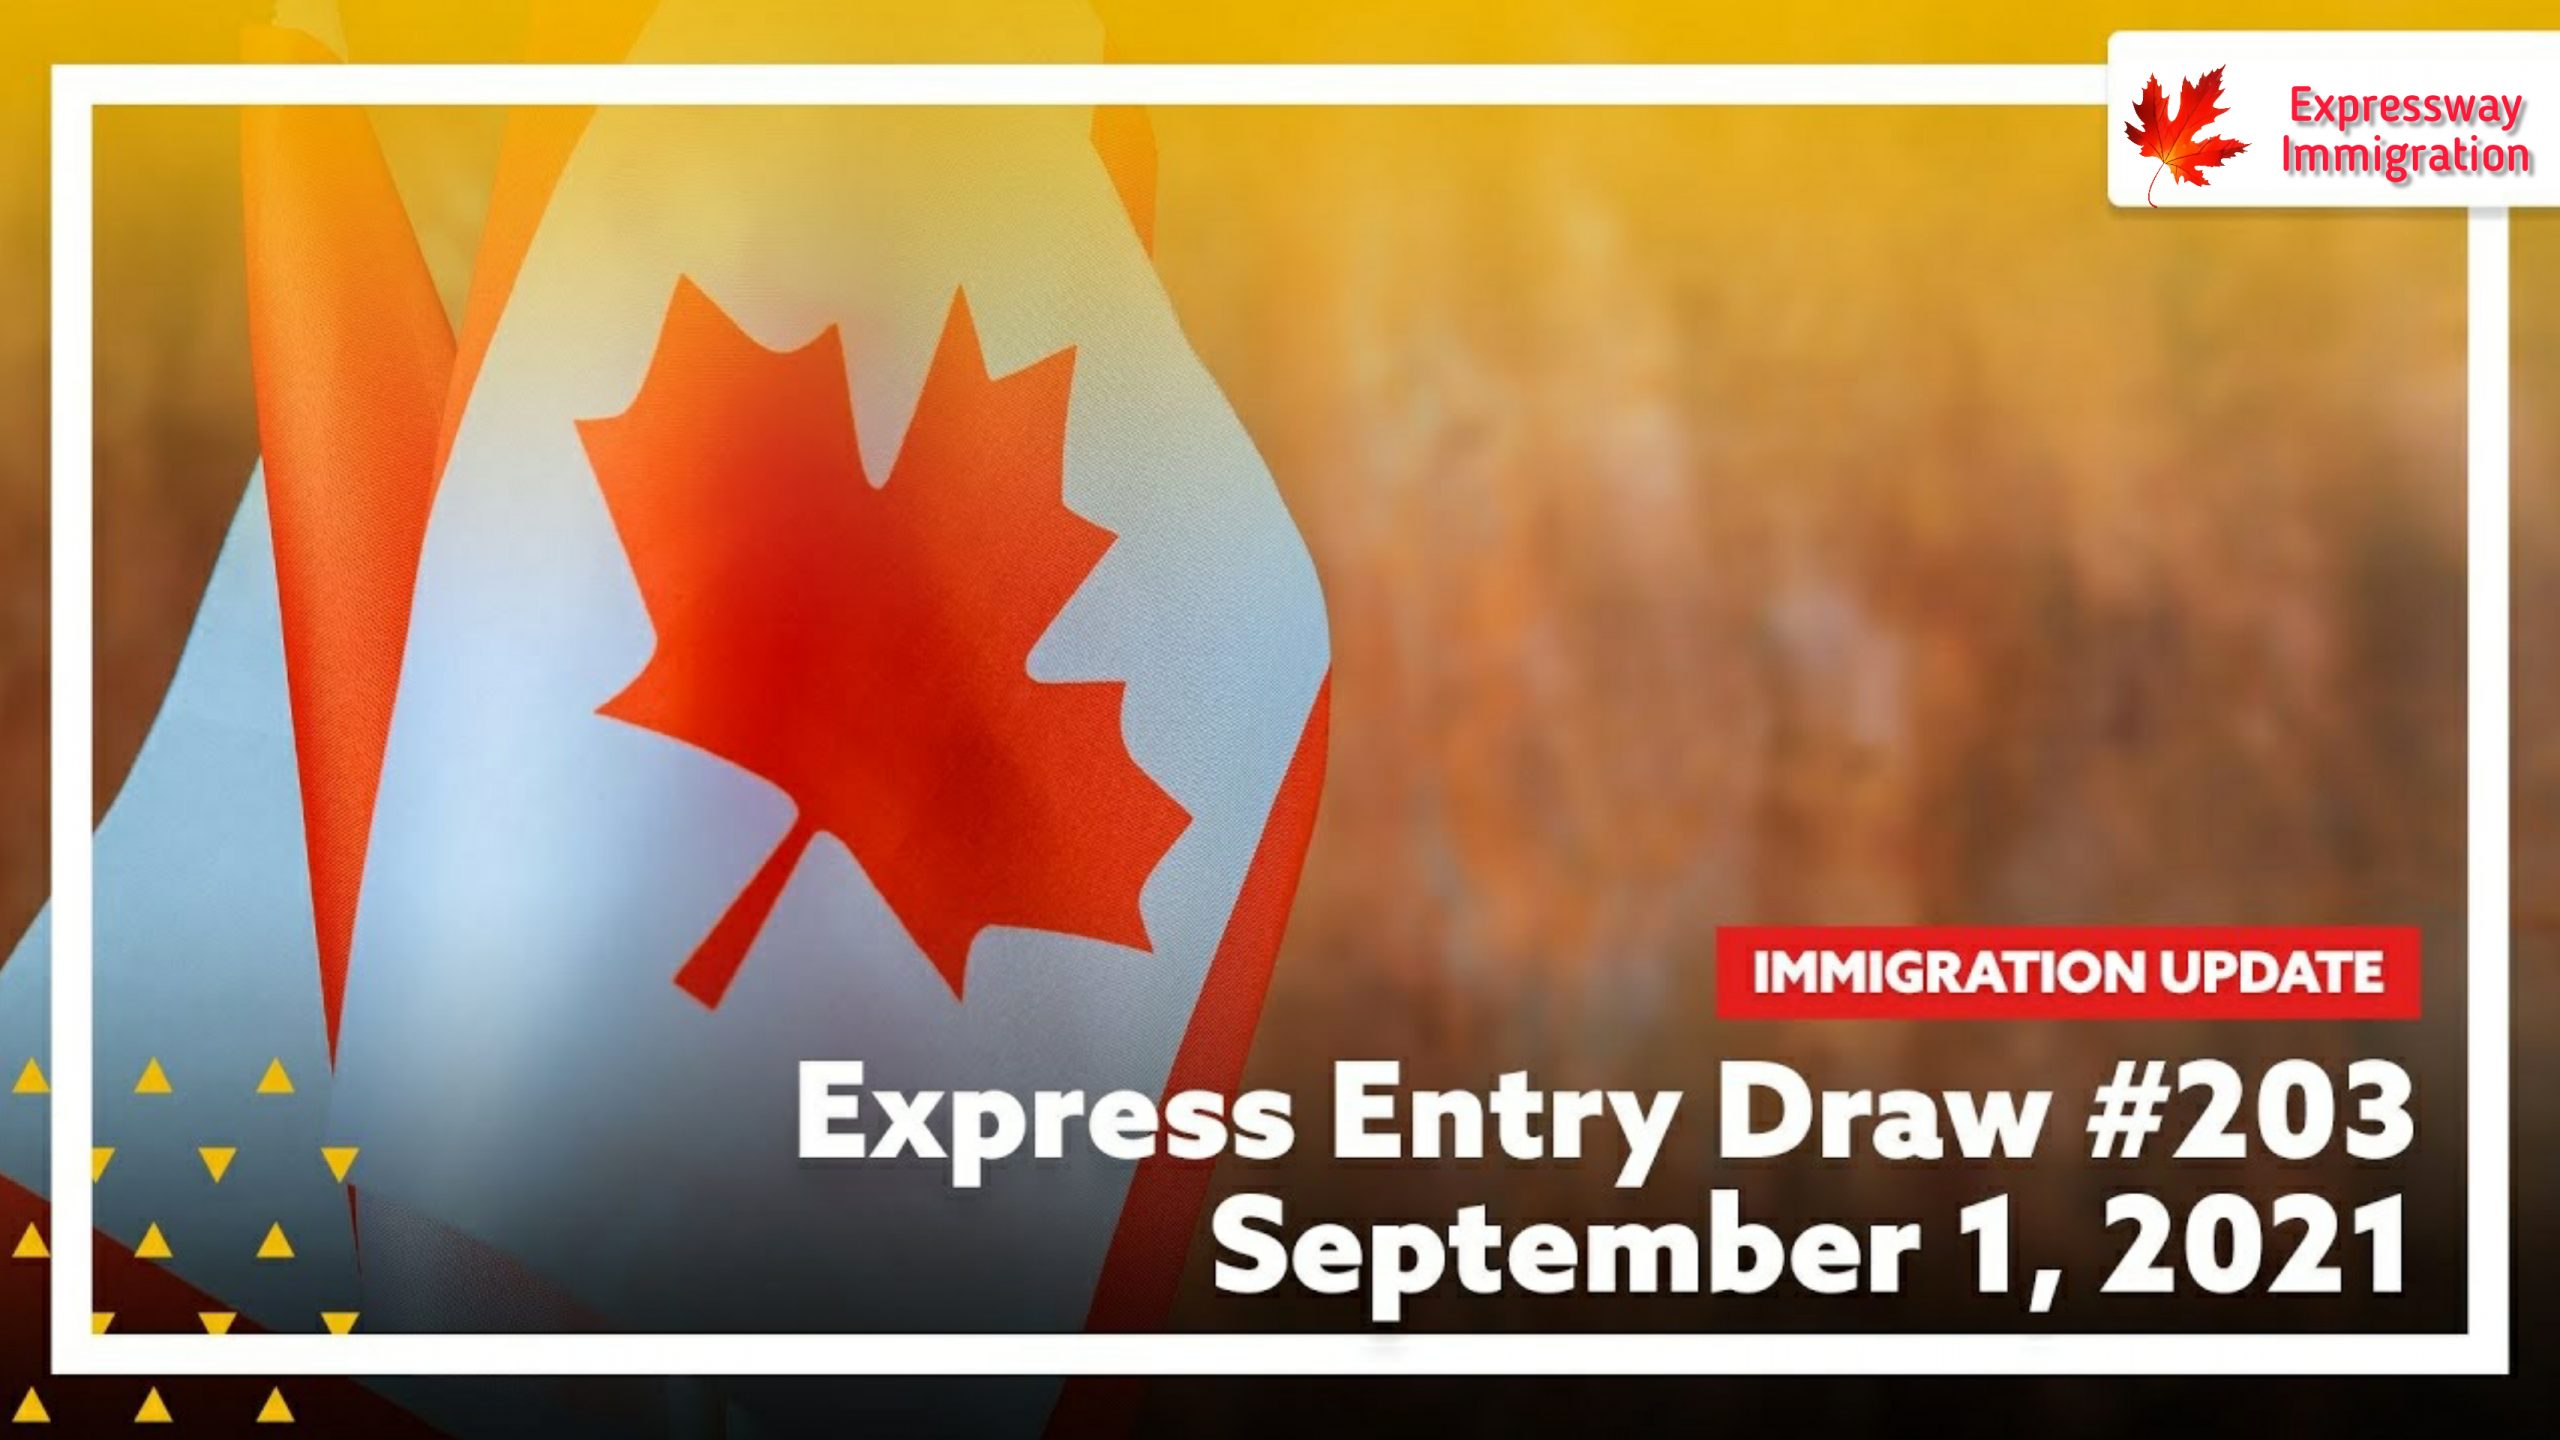 Canada Immigration Express Entry DrawExpressway Immigration